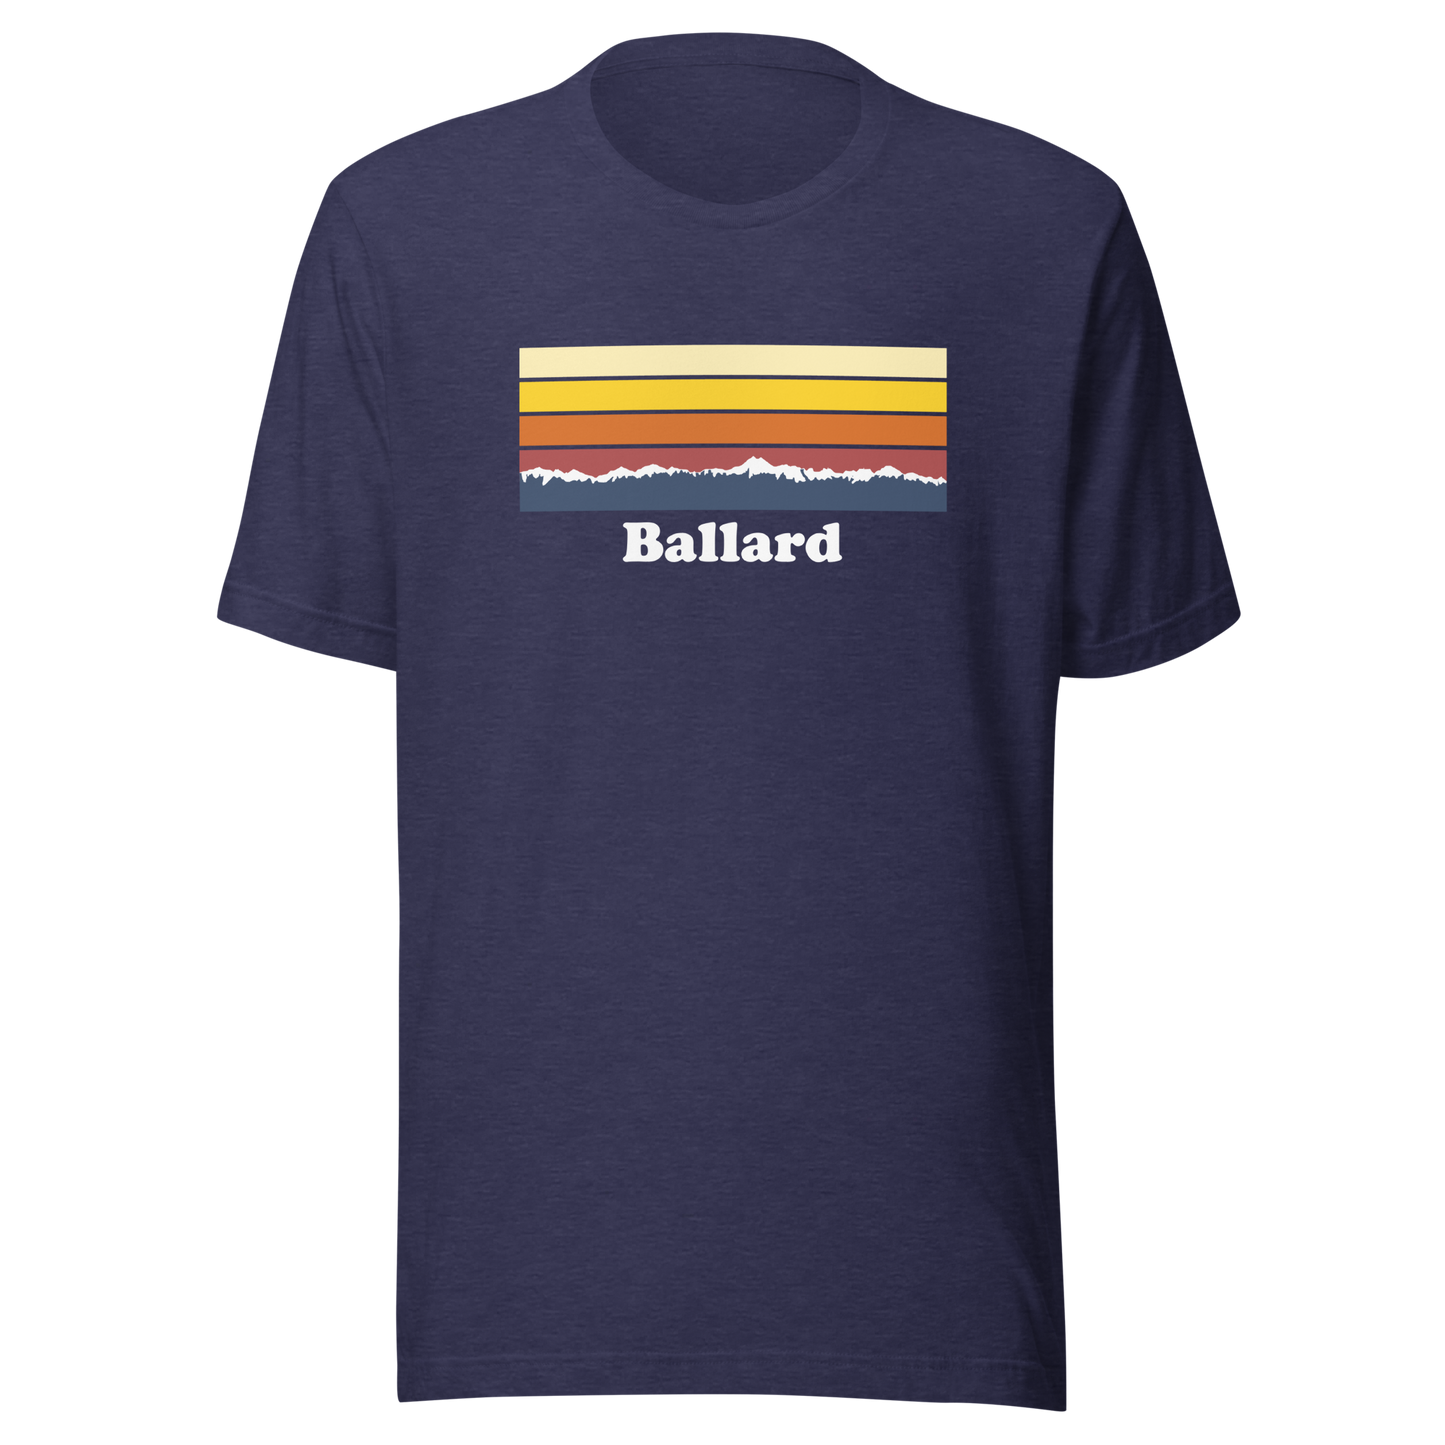 Ballard and the Olympic Mountains unisex t-shirt